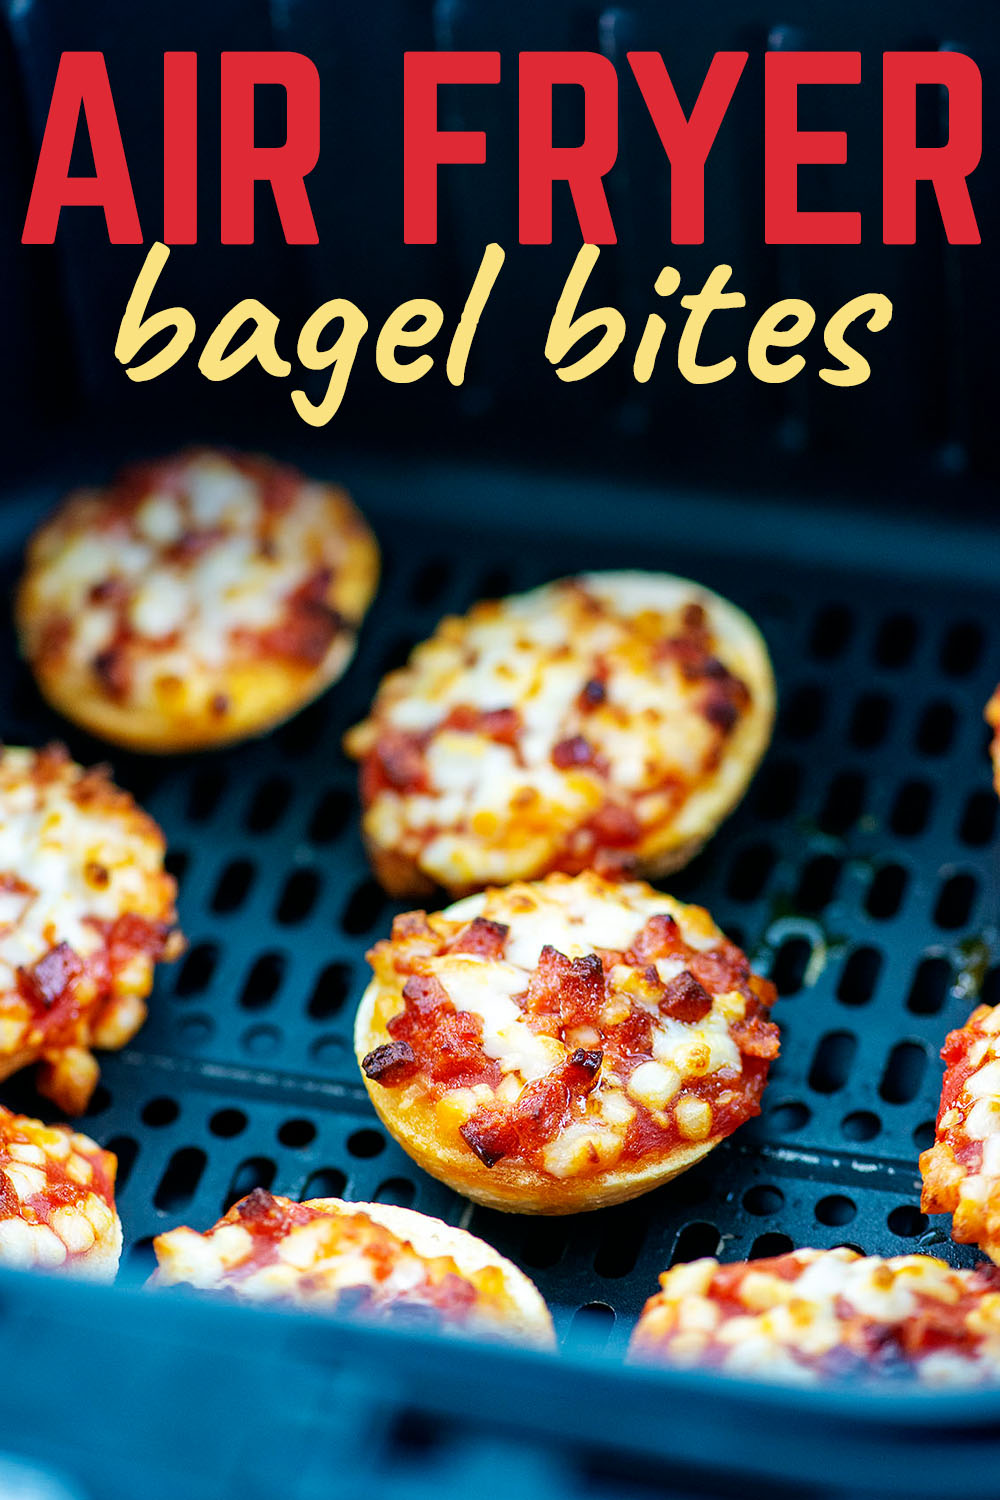 If you are a lover of bagel bites than you should try making them in your air fryer!  The bites come out cooked really well and even!